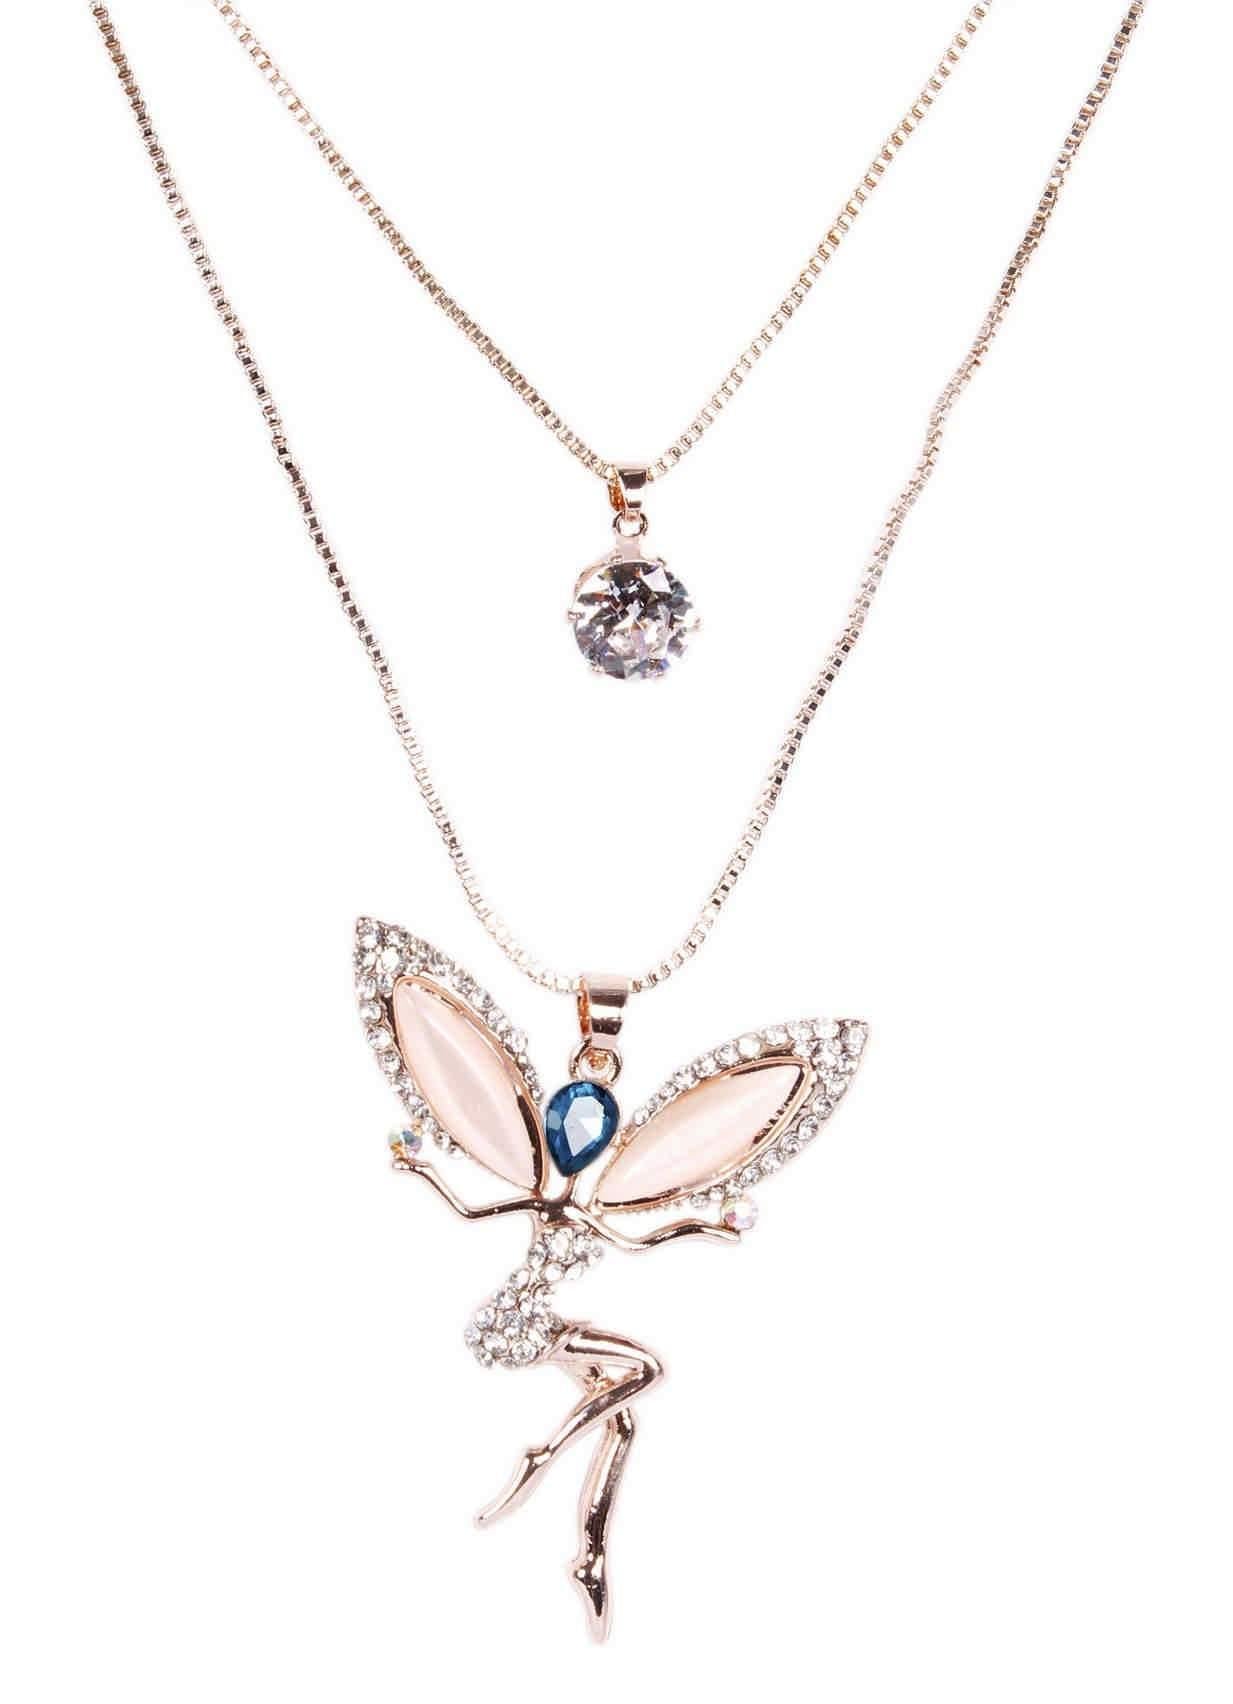 Indian Petals Rhinestones Studded Fairy Design Imitation Fashion Metal Pendant with Long Chain for Girls - Indian Petals